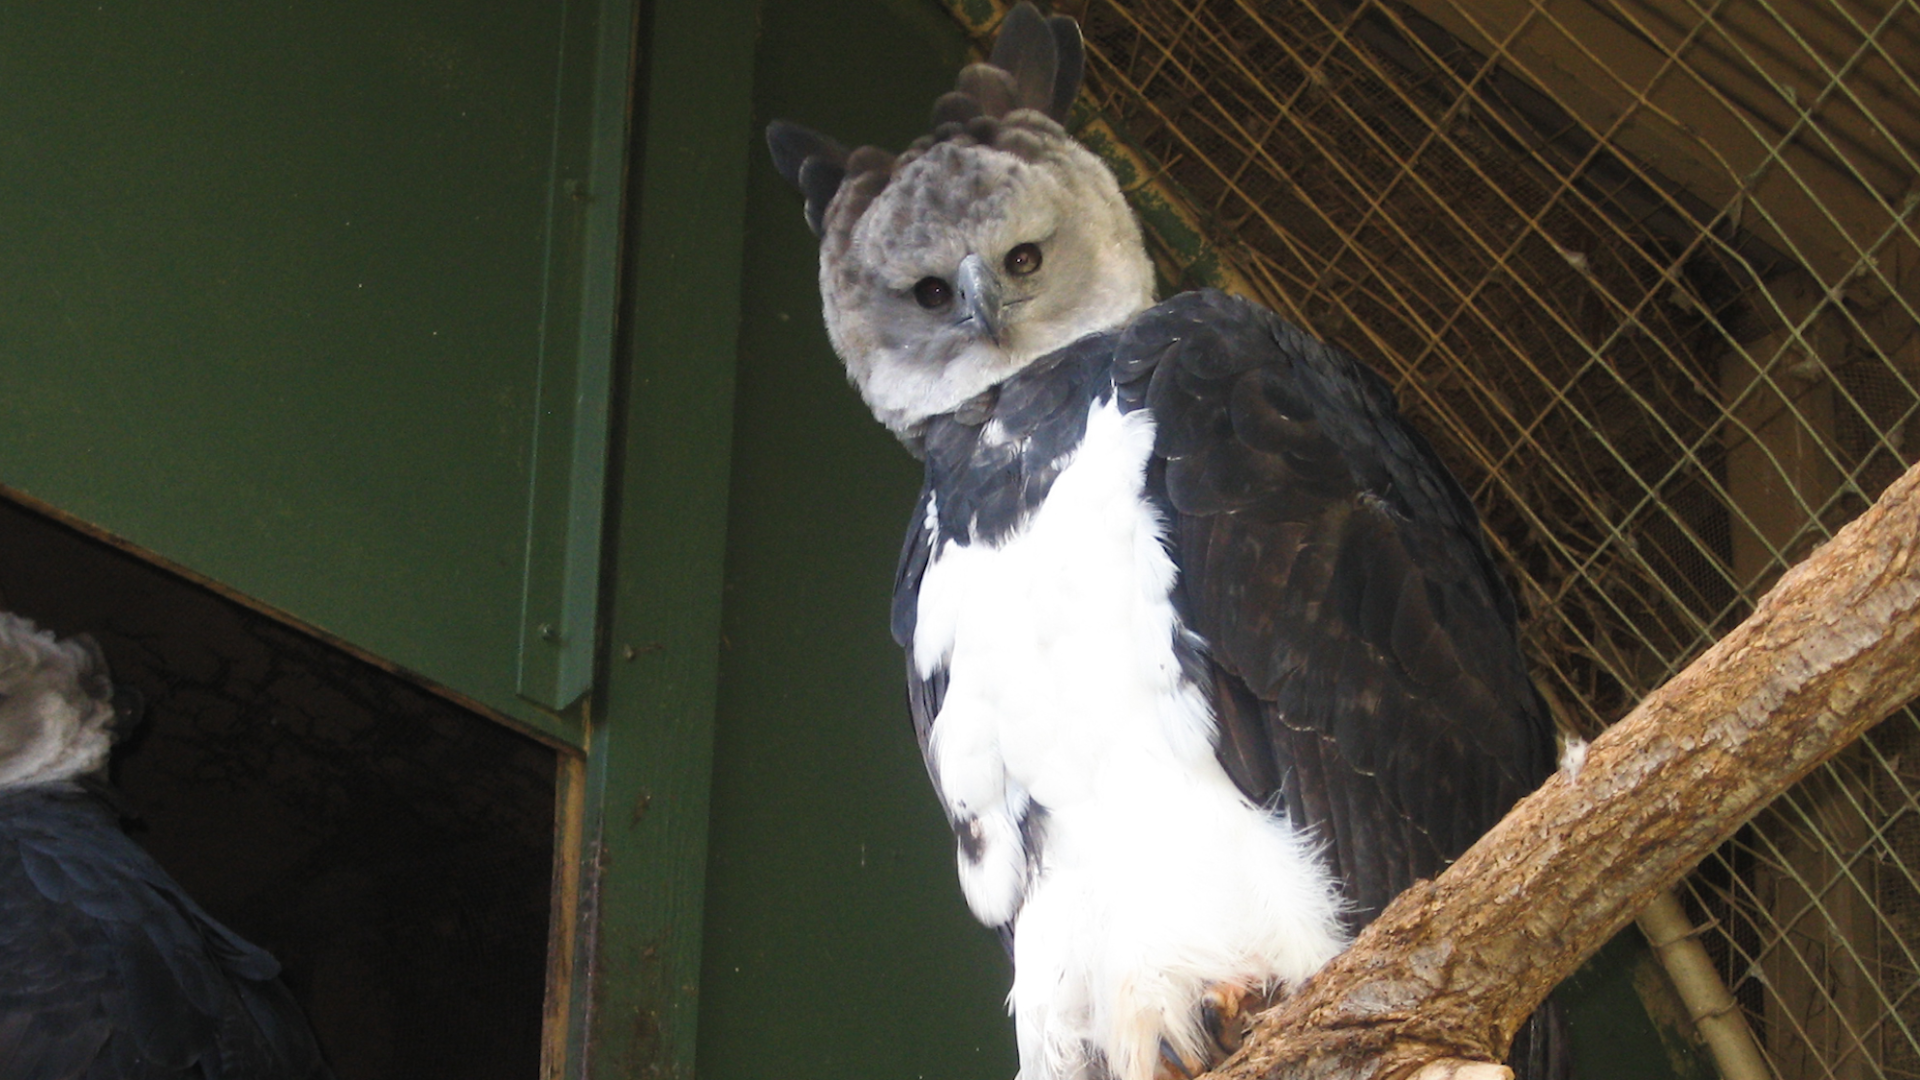 Harpy eagles are so huge they're mistaken for humans in costume